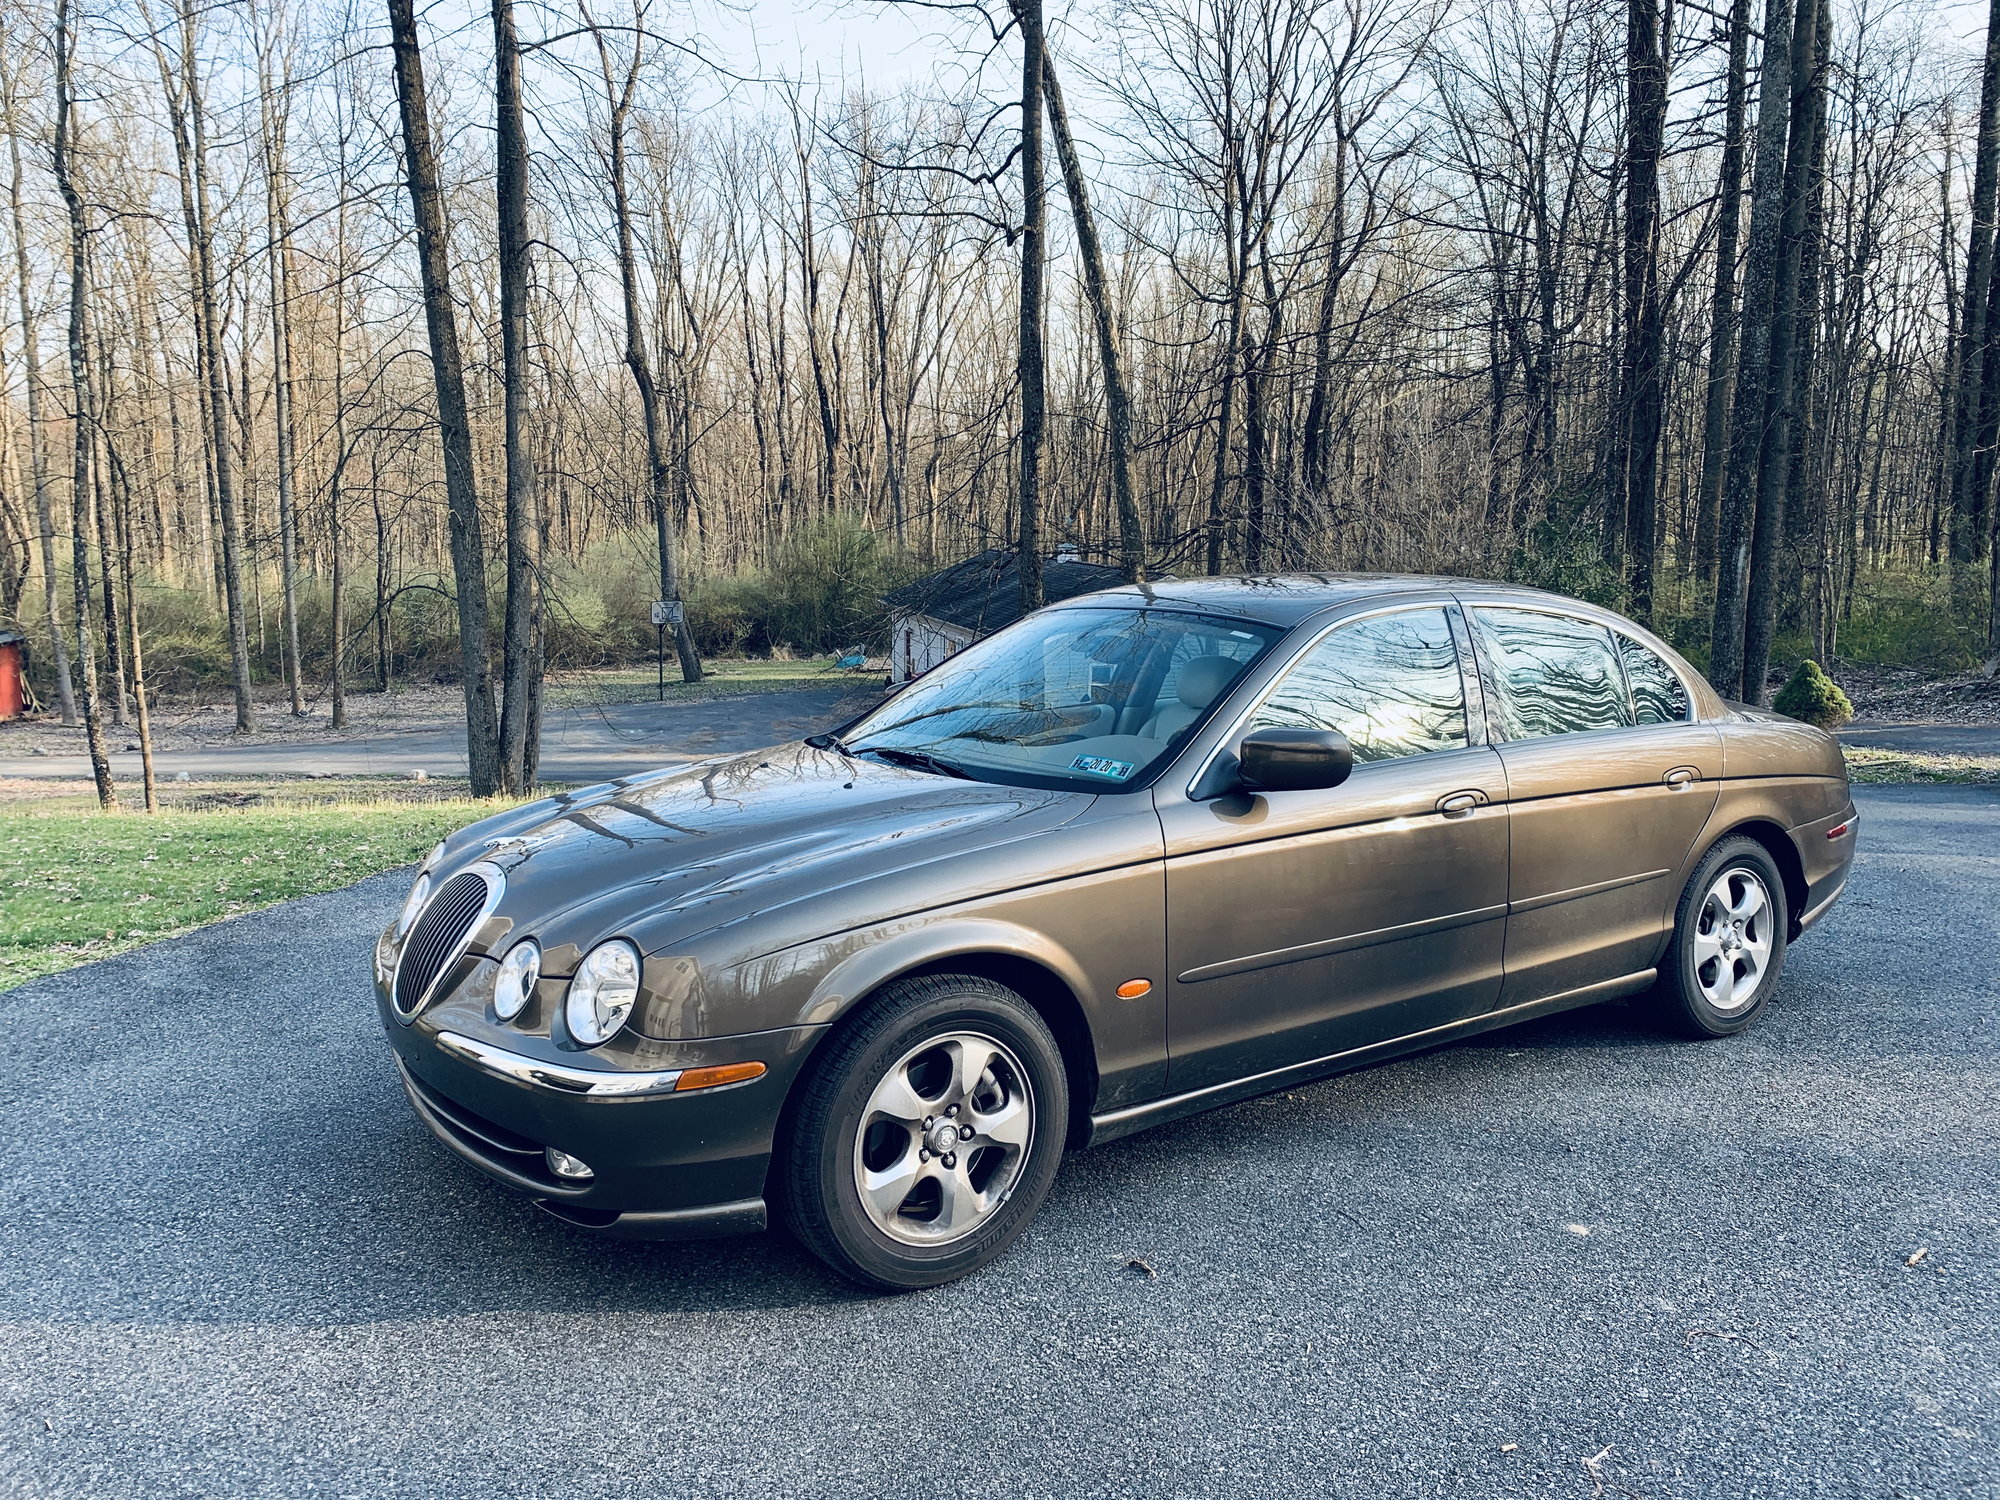 2001 Jaguar S-Type - Excellent Condition 2001 Roman Bronze 3.0 S-type - Used - VIN SAJDA01N01FL94639 - 43,919 Miles - 6 cyl - Automatic - Brown - Upper Mt Bethel, PA 18351, United States